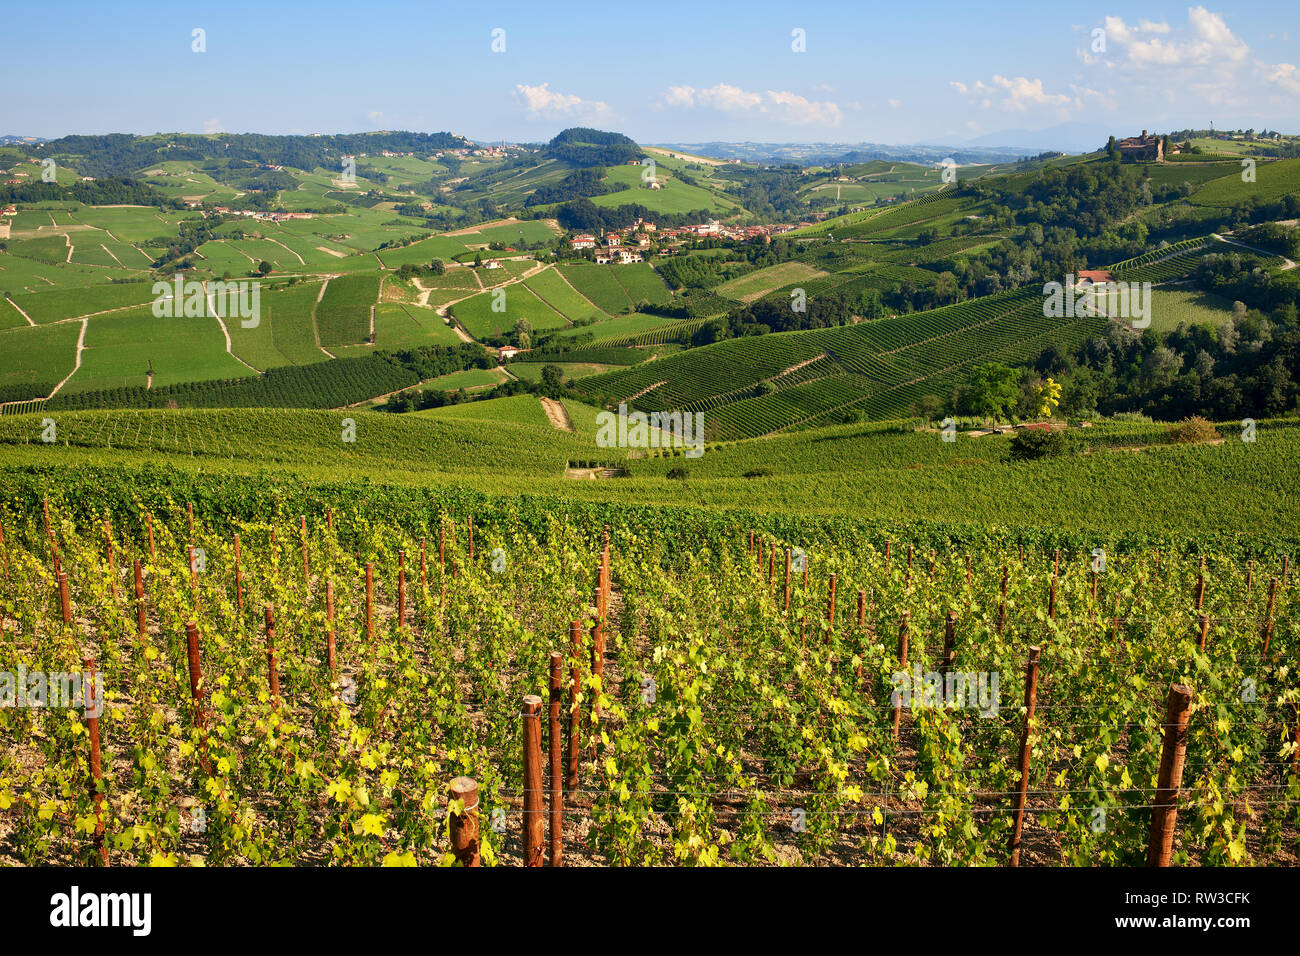 Green vineyards on the hills in Langhe area of Piedmont region in Northern Italy. Stock Photo